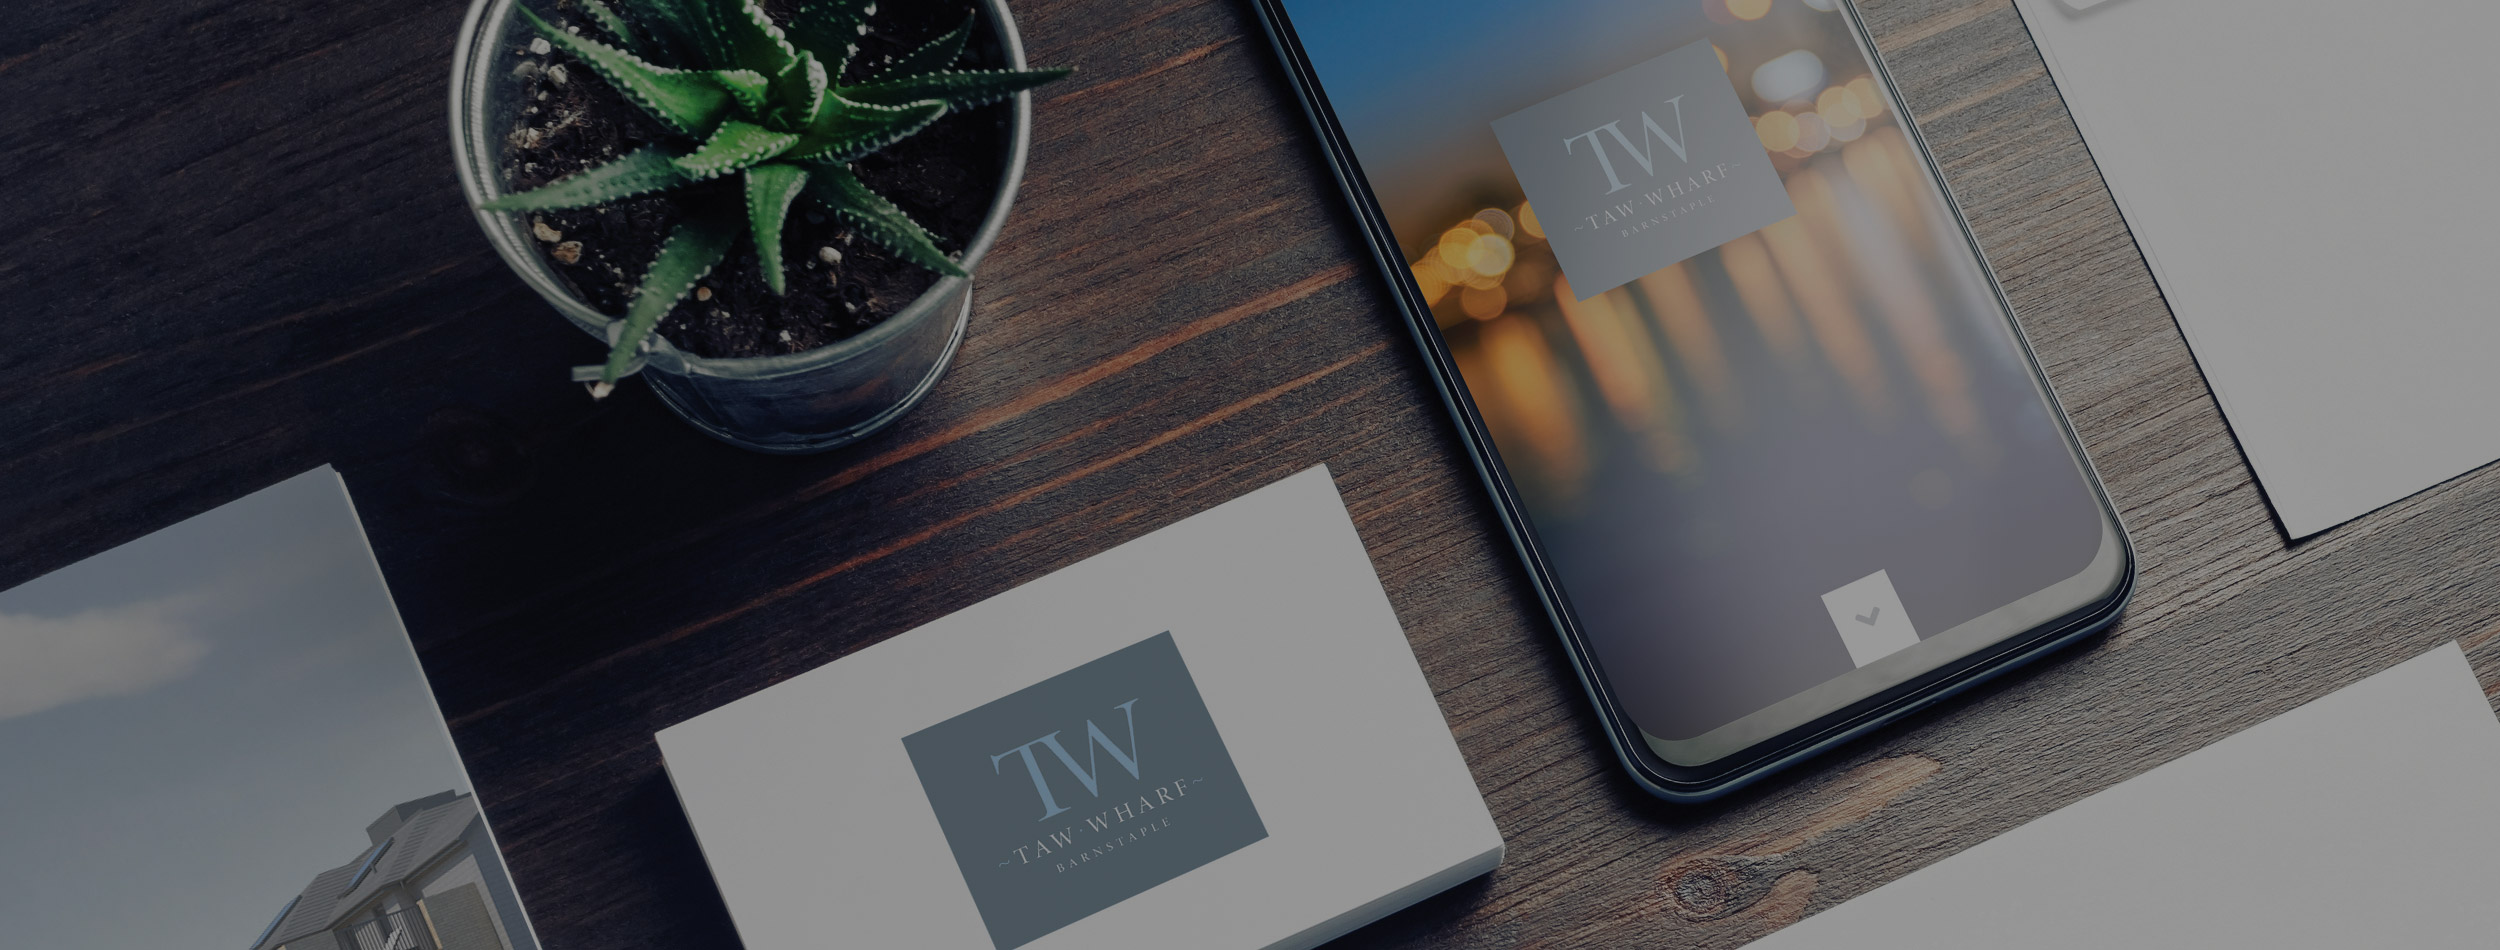 Taw Wharf Development Anchorwood Bank Barnstaple Branding and Website by Inventive